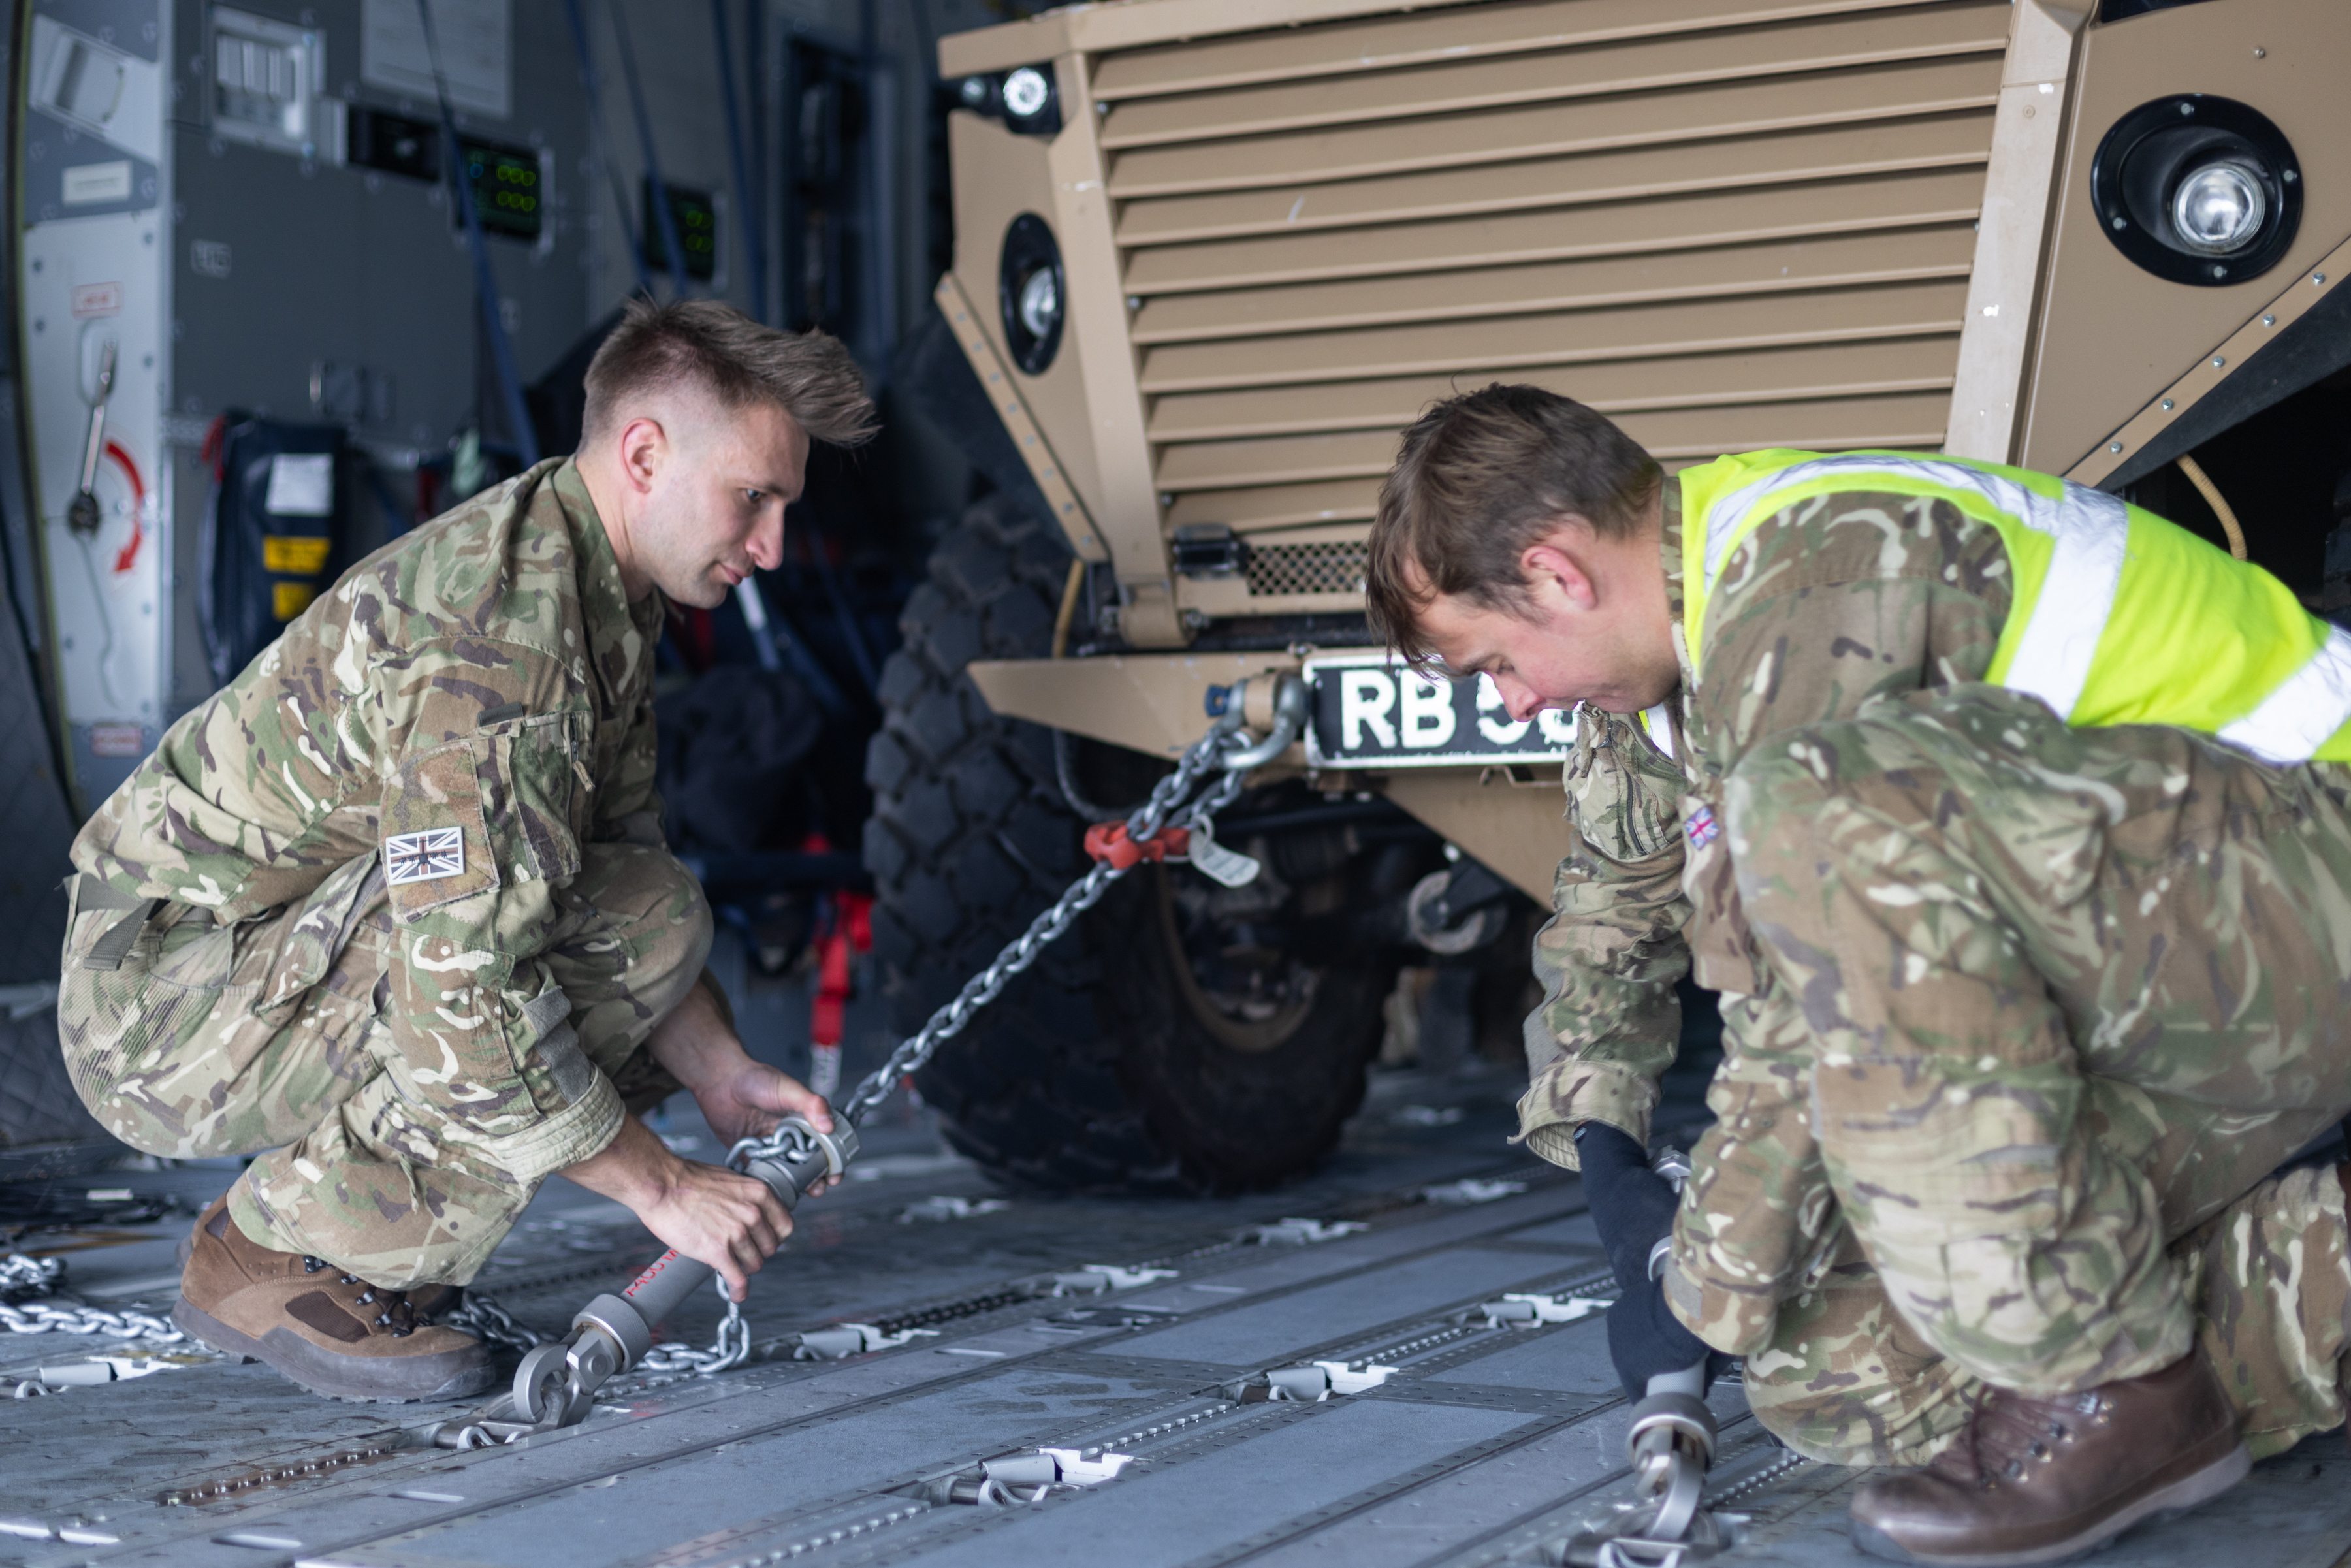 1 Squadron RAF Regiment's Foxhound Armoured Vehicle being secured in an Atlas C Mk.1 aircraft.